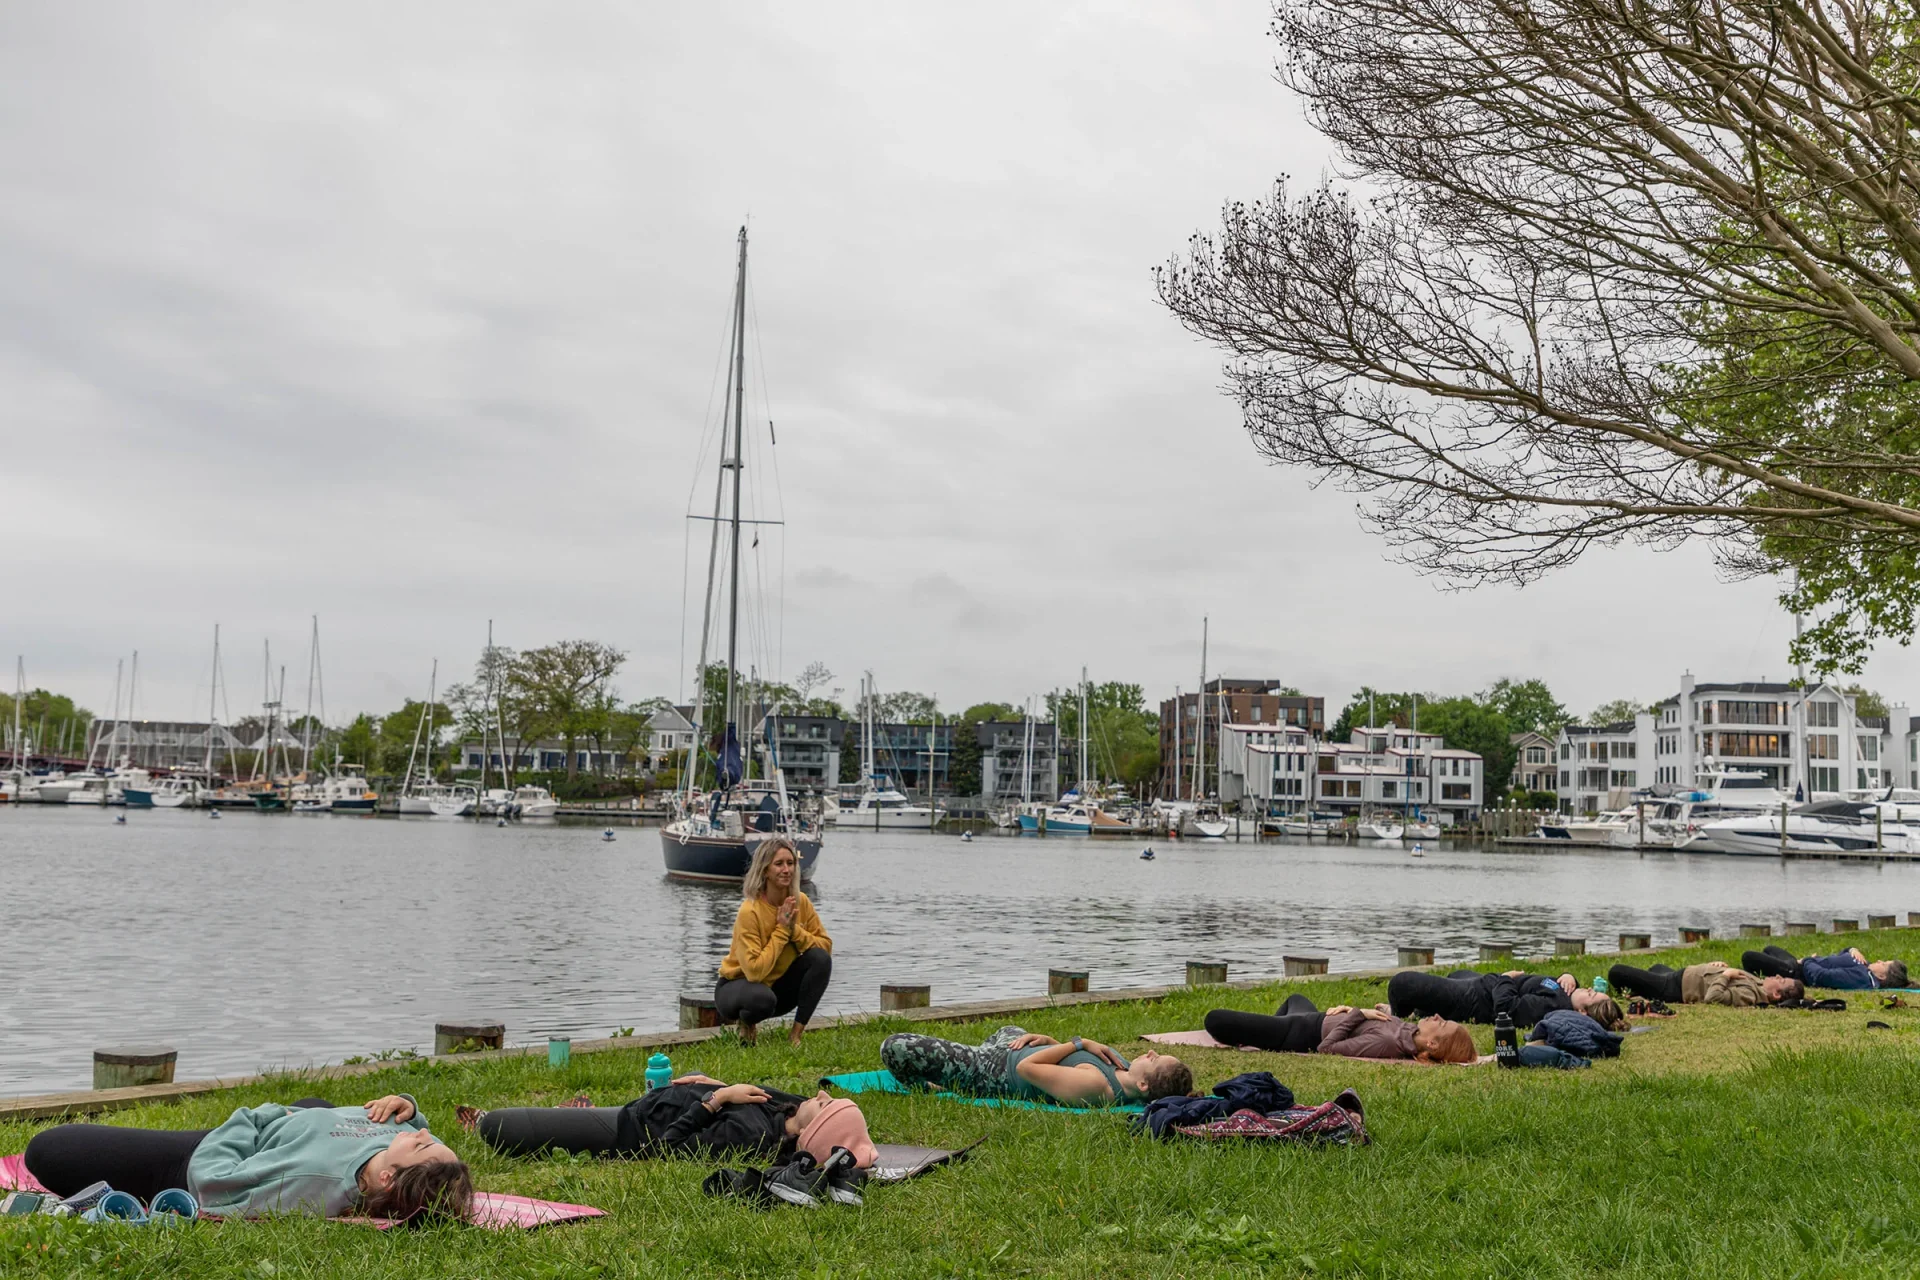 Several people lie on yoga mats in the grass in front of the water.